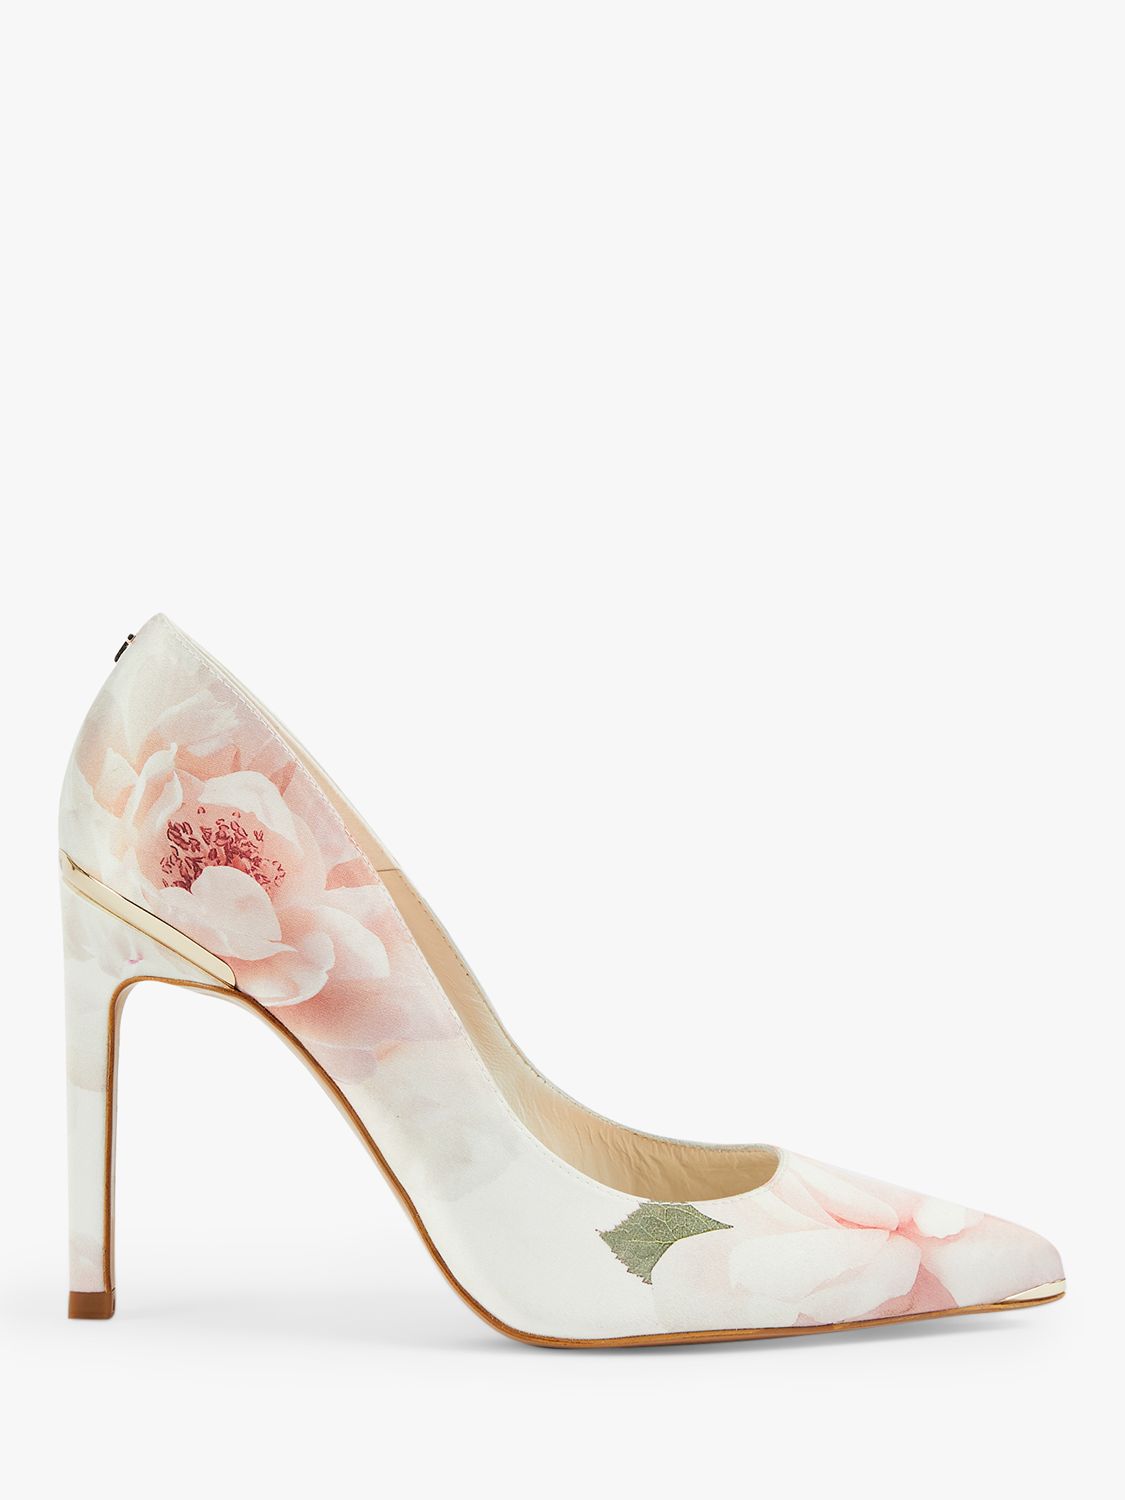 Ted Baker Phlora Floral Leather Court Shoes, Pink, 3